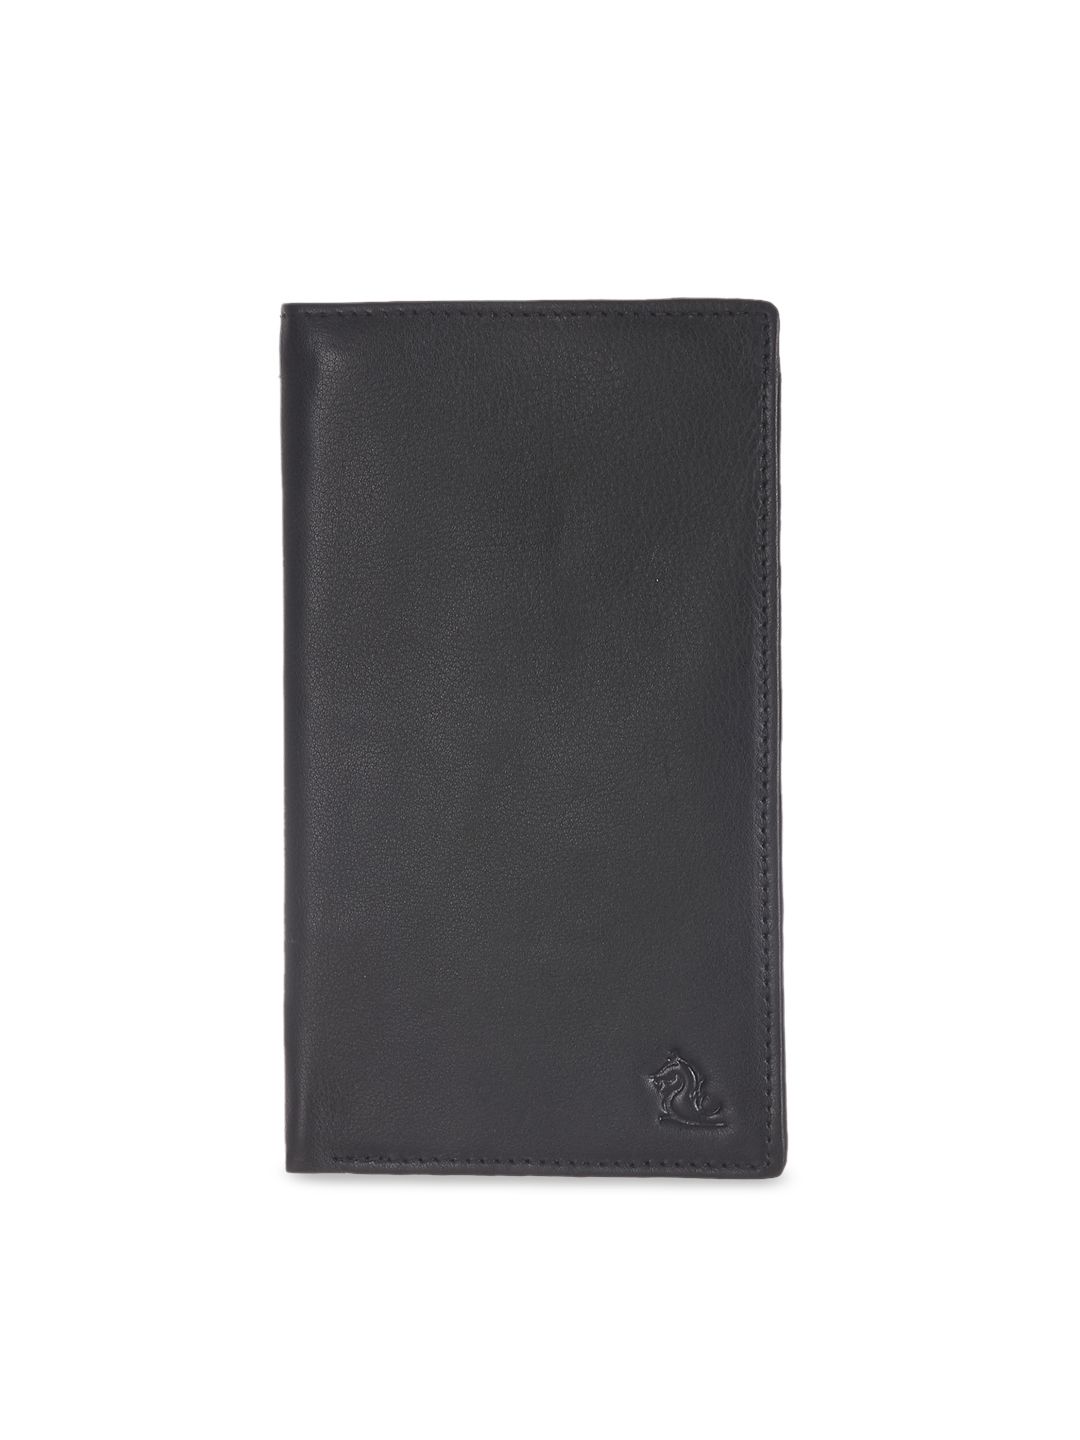 Kara Unisex Black Solid Leather Two Fold Wallet Price in India